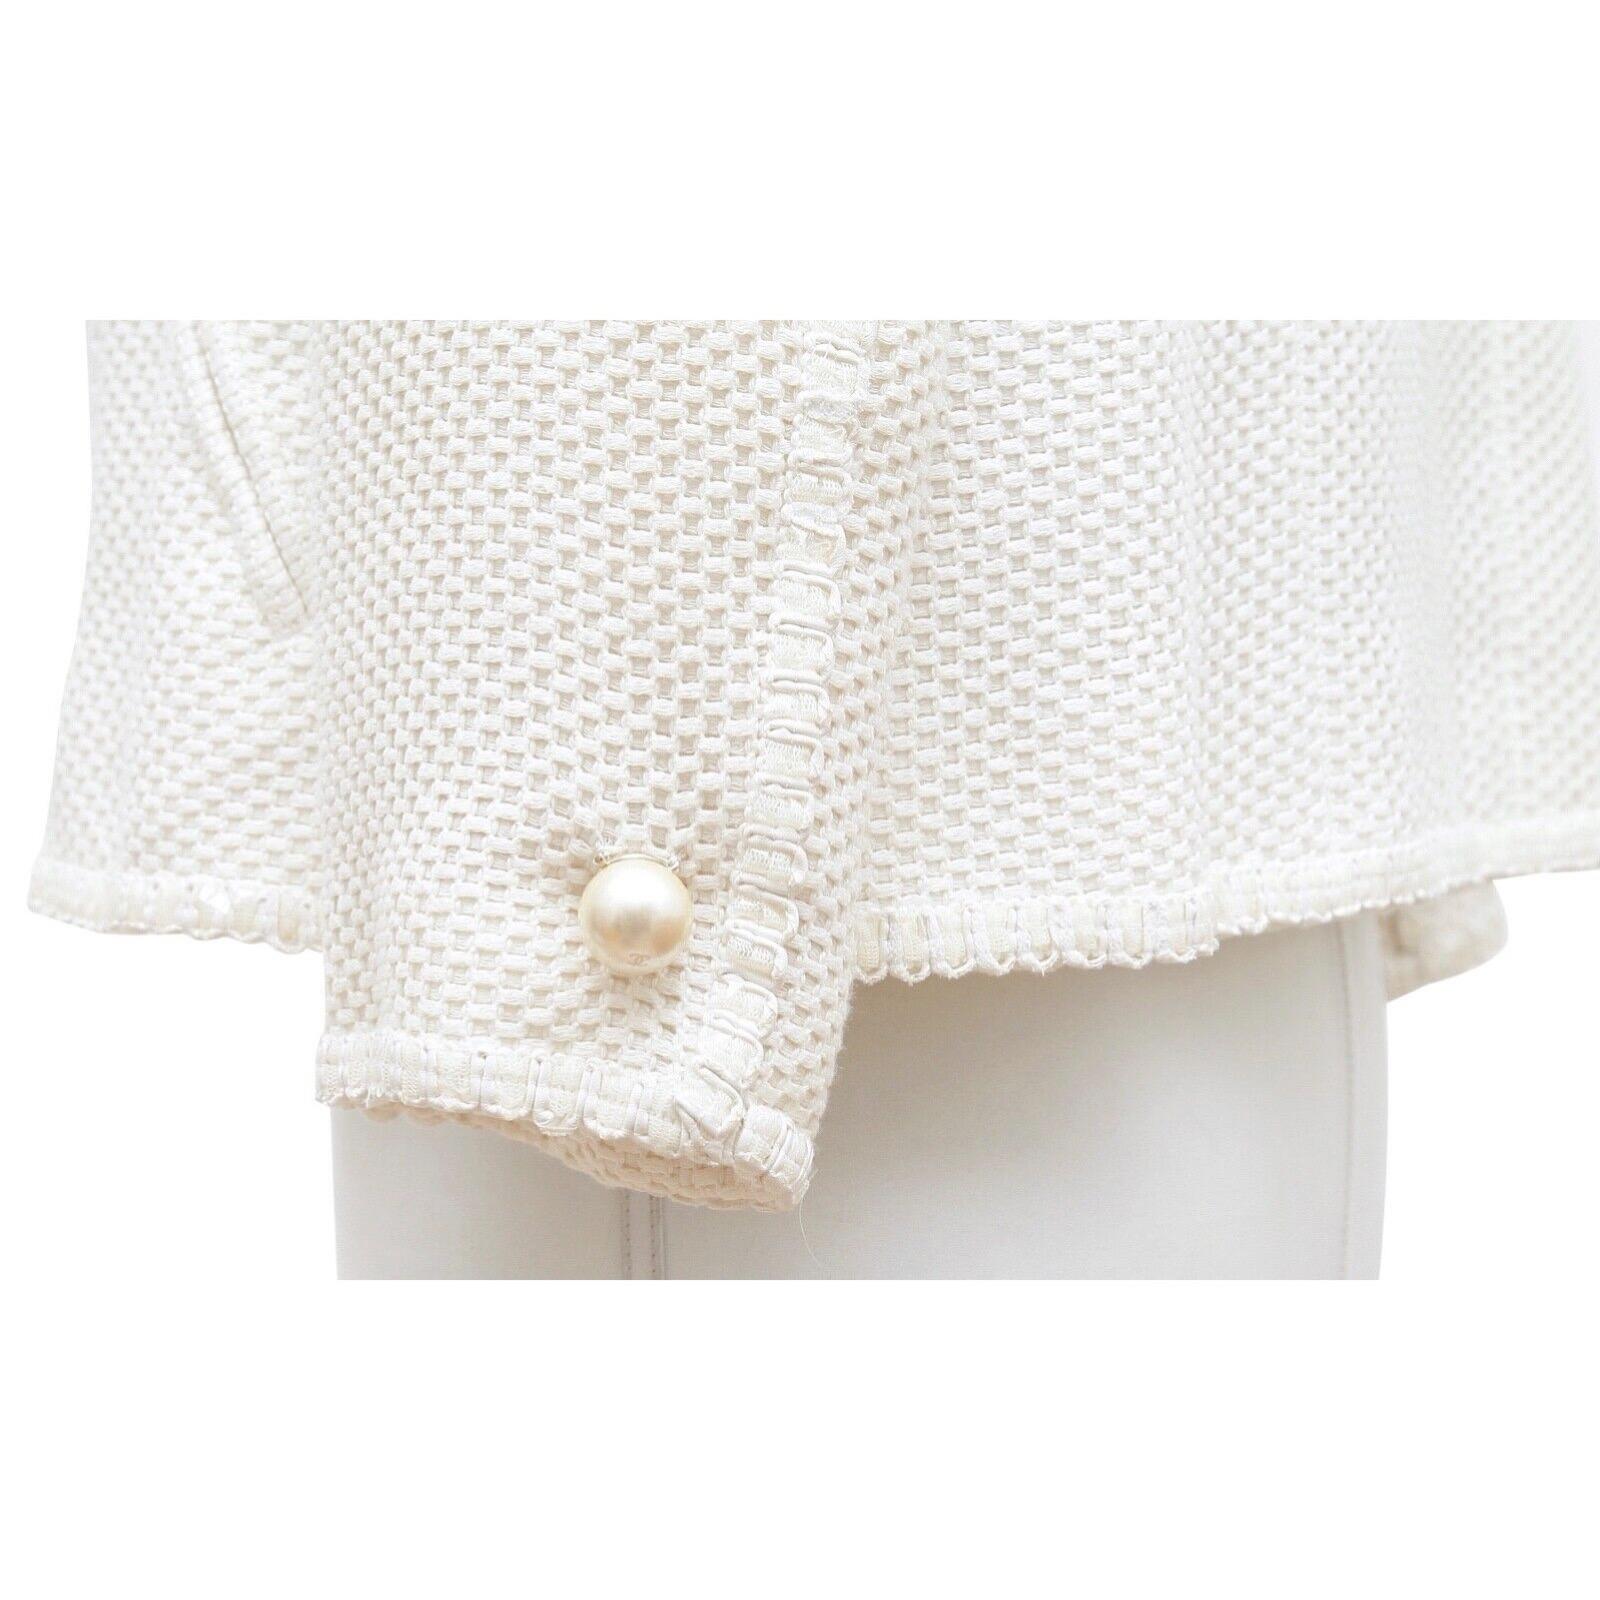 CHANEL Tweed Jacket Coat White Pearl 3/4 Sleeve Double Breasted 2013 13S Sz 34 For Sale 3